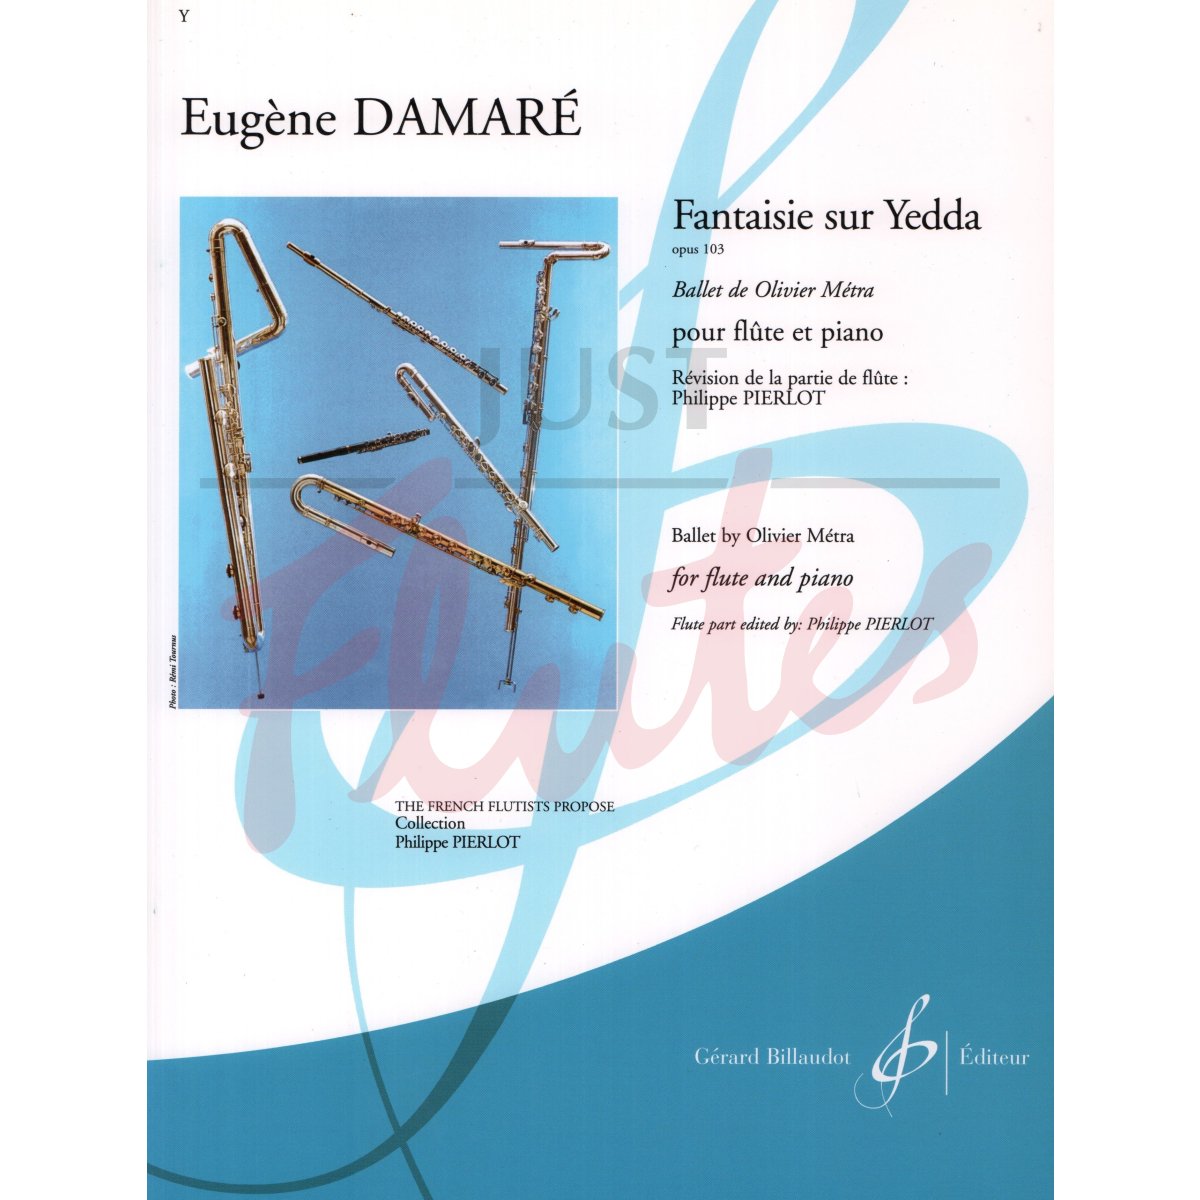 Fantasie sur Yedda for Flute and Piano, Op. 103